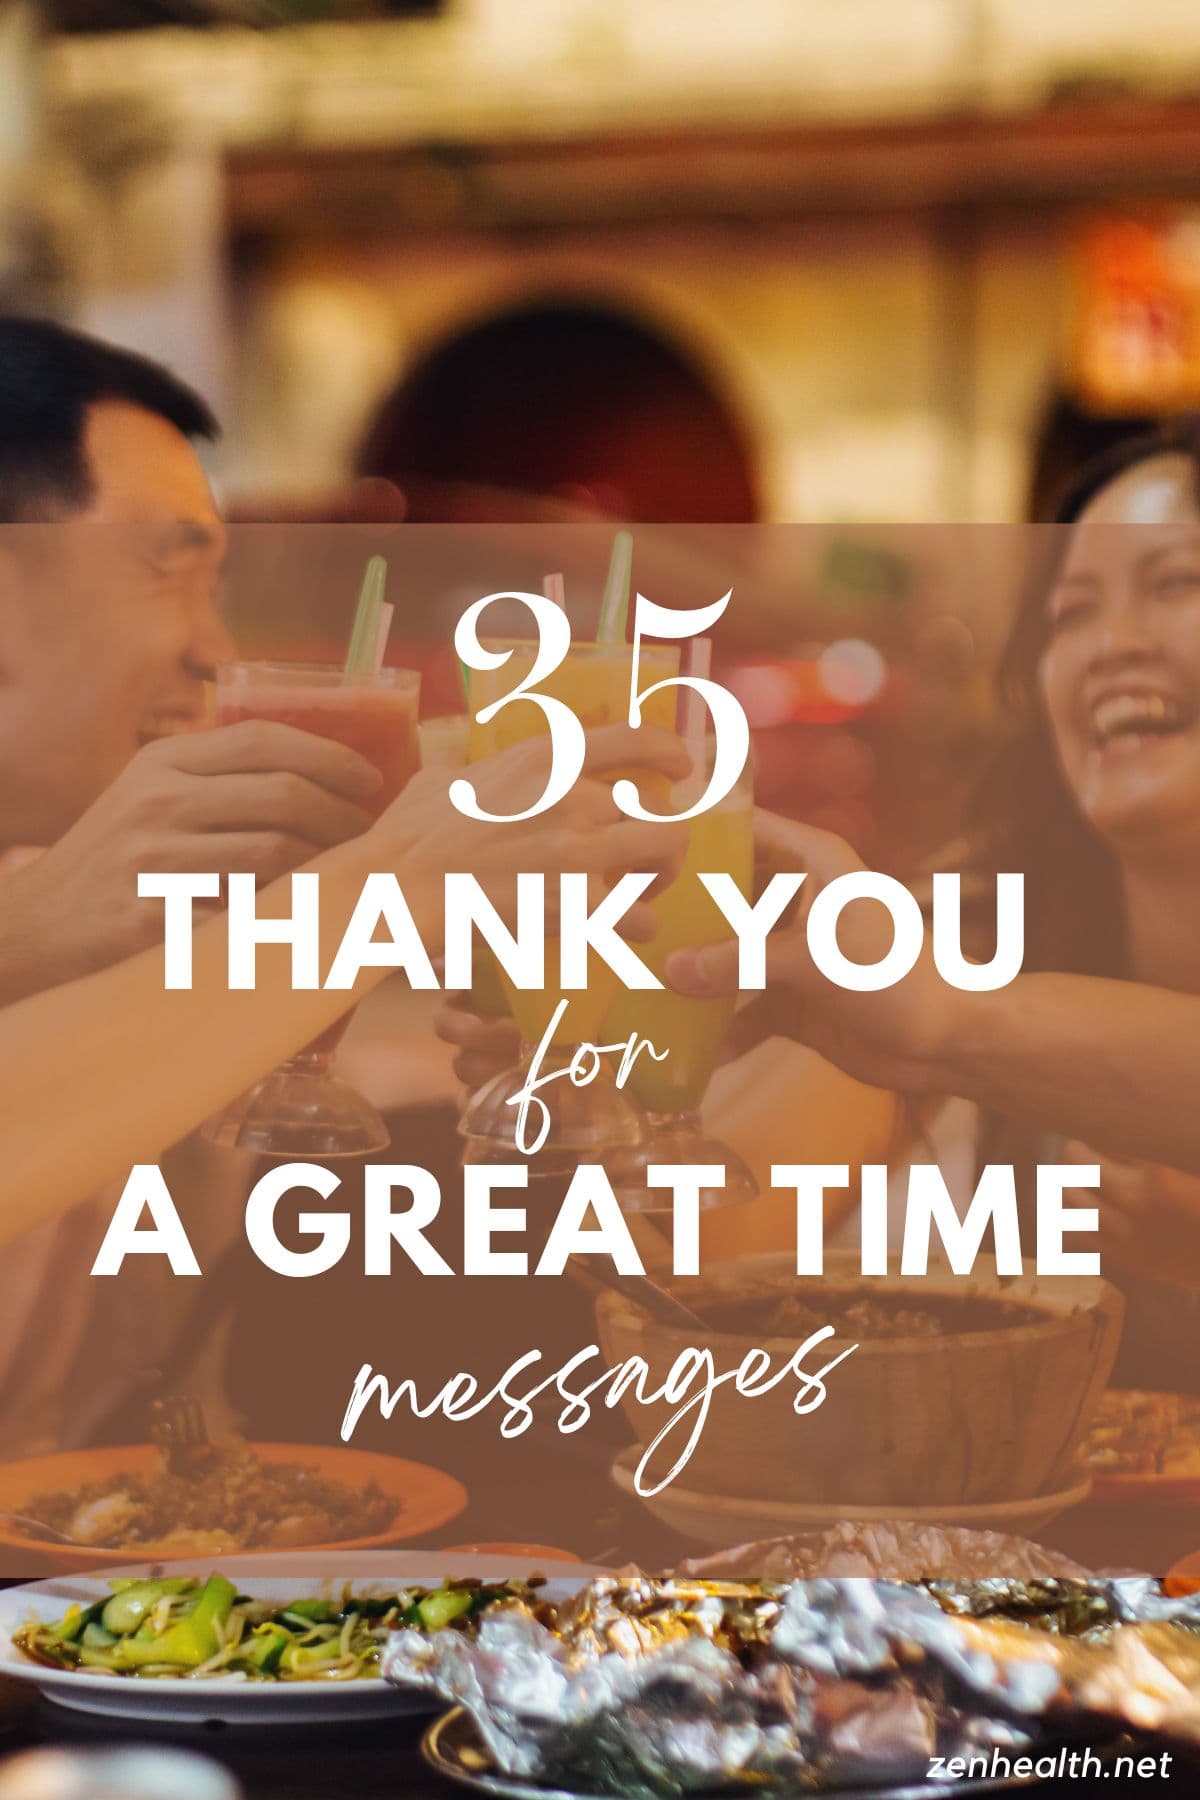 35 thank you for a great time messages text overlay on a photo of people with drinks in their hands and food on the table